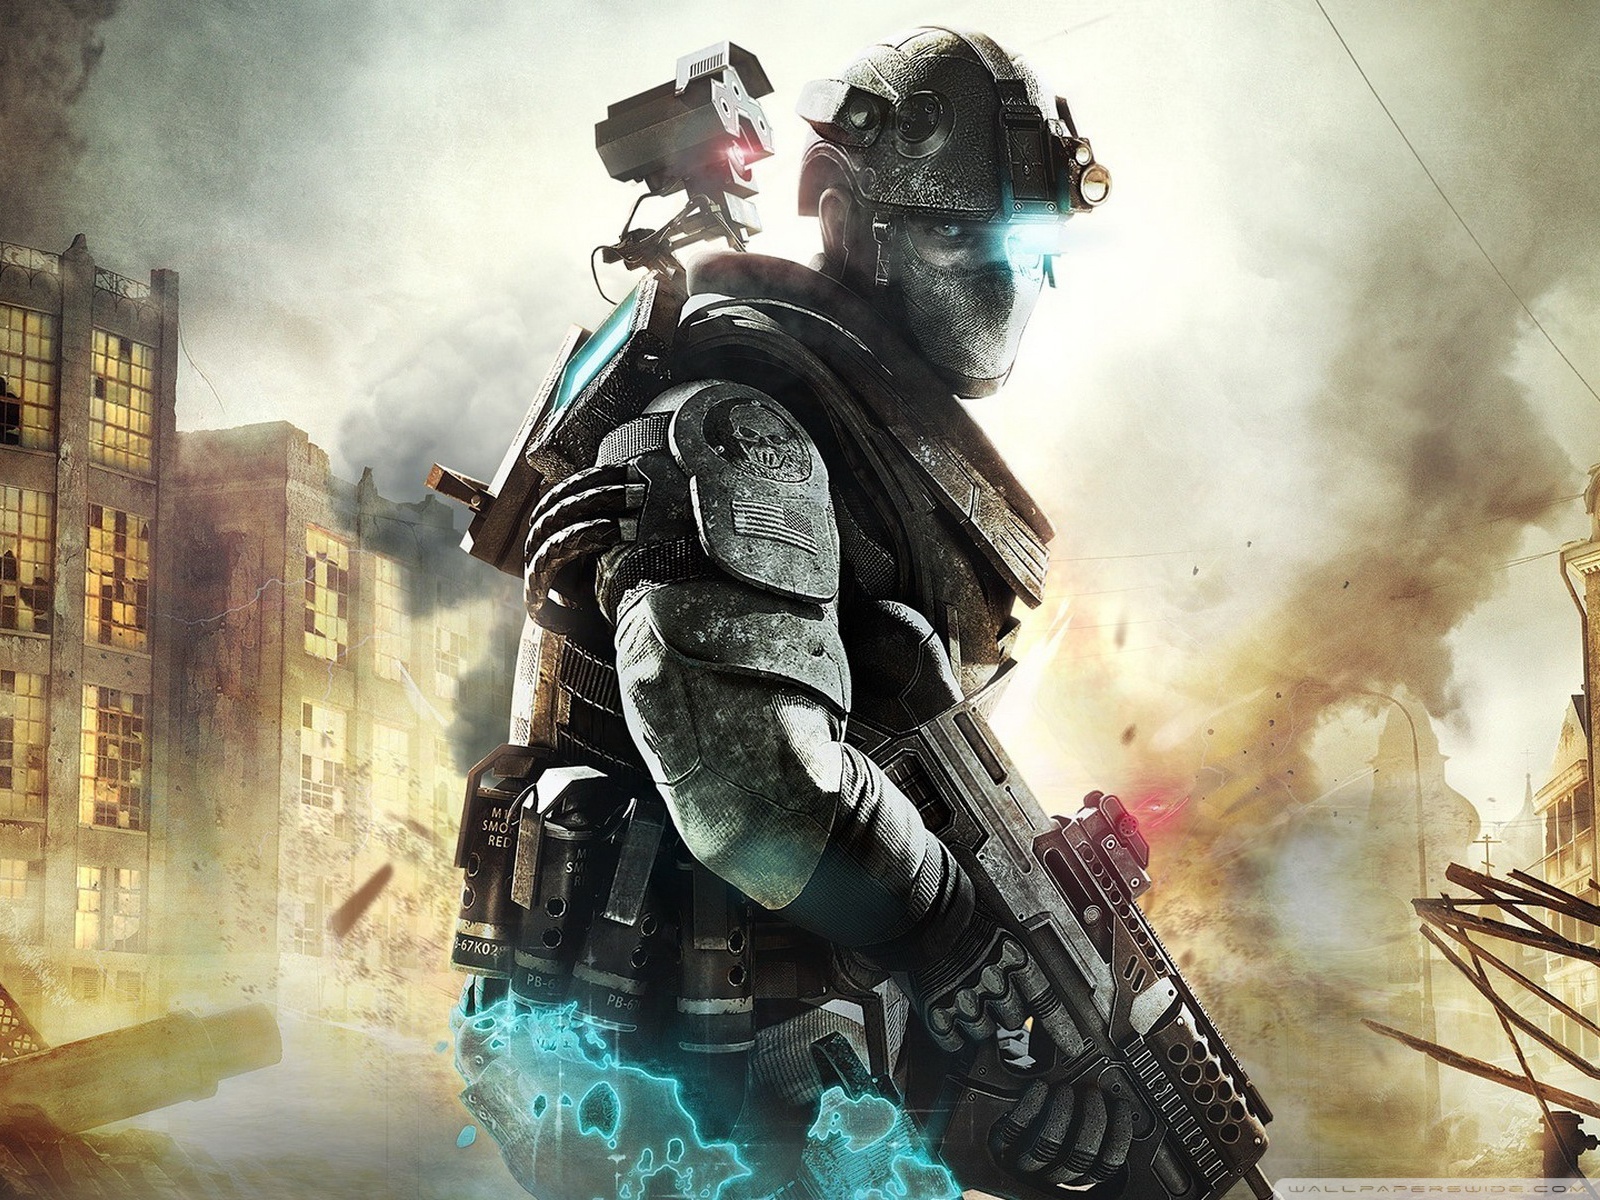 warzone» 1080P, 2k, 4k HD wallpapers, backgrounds free download | Rare  Gallery